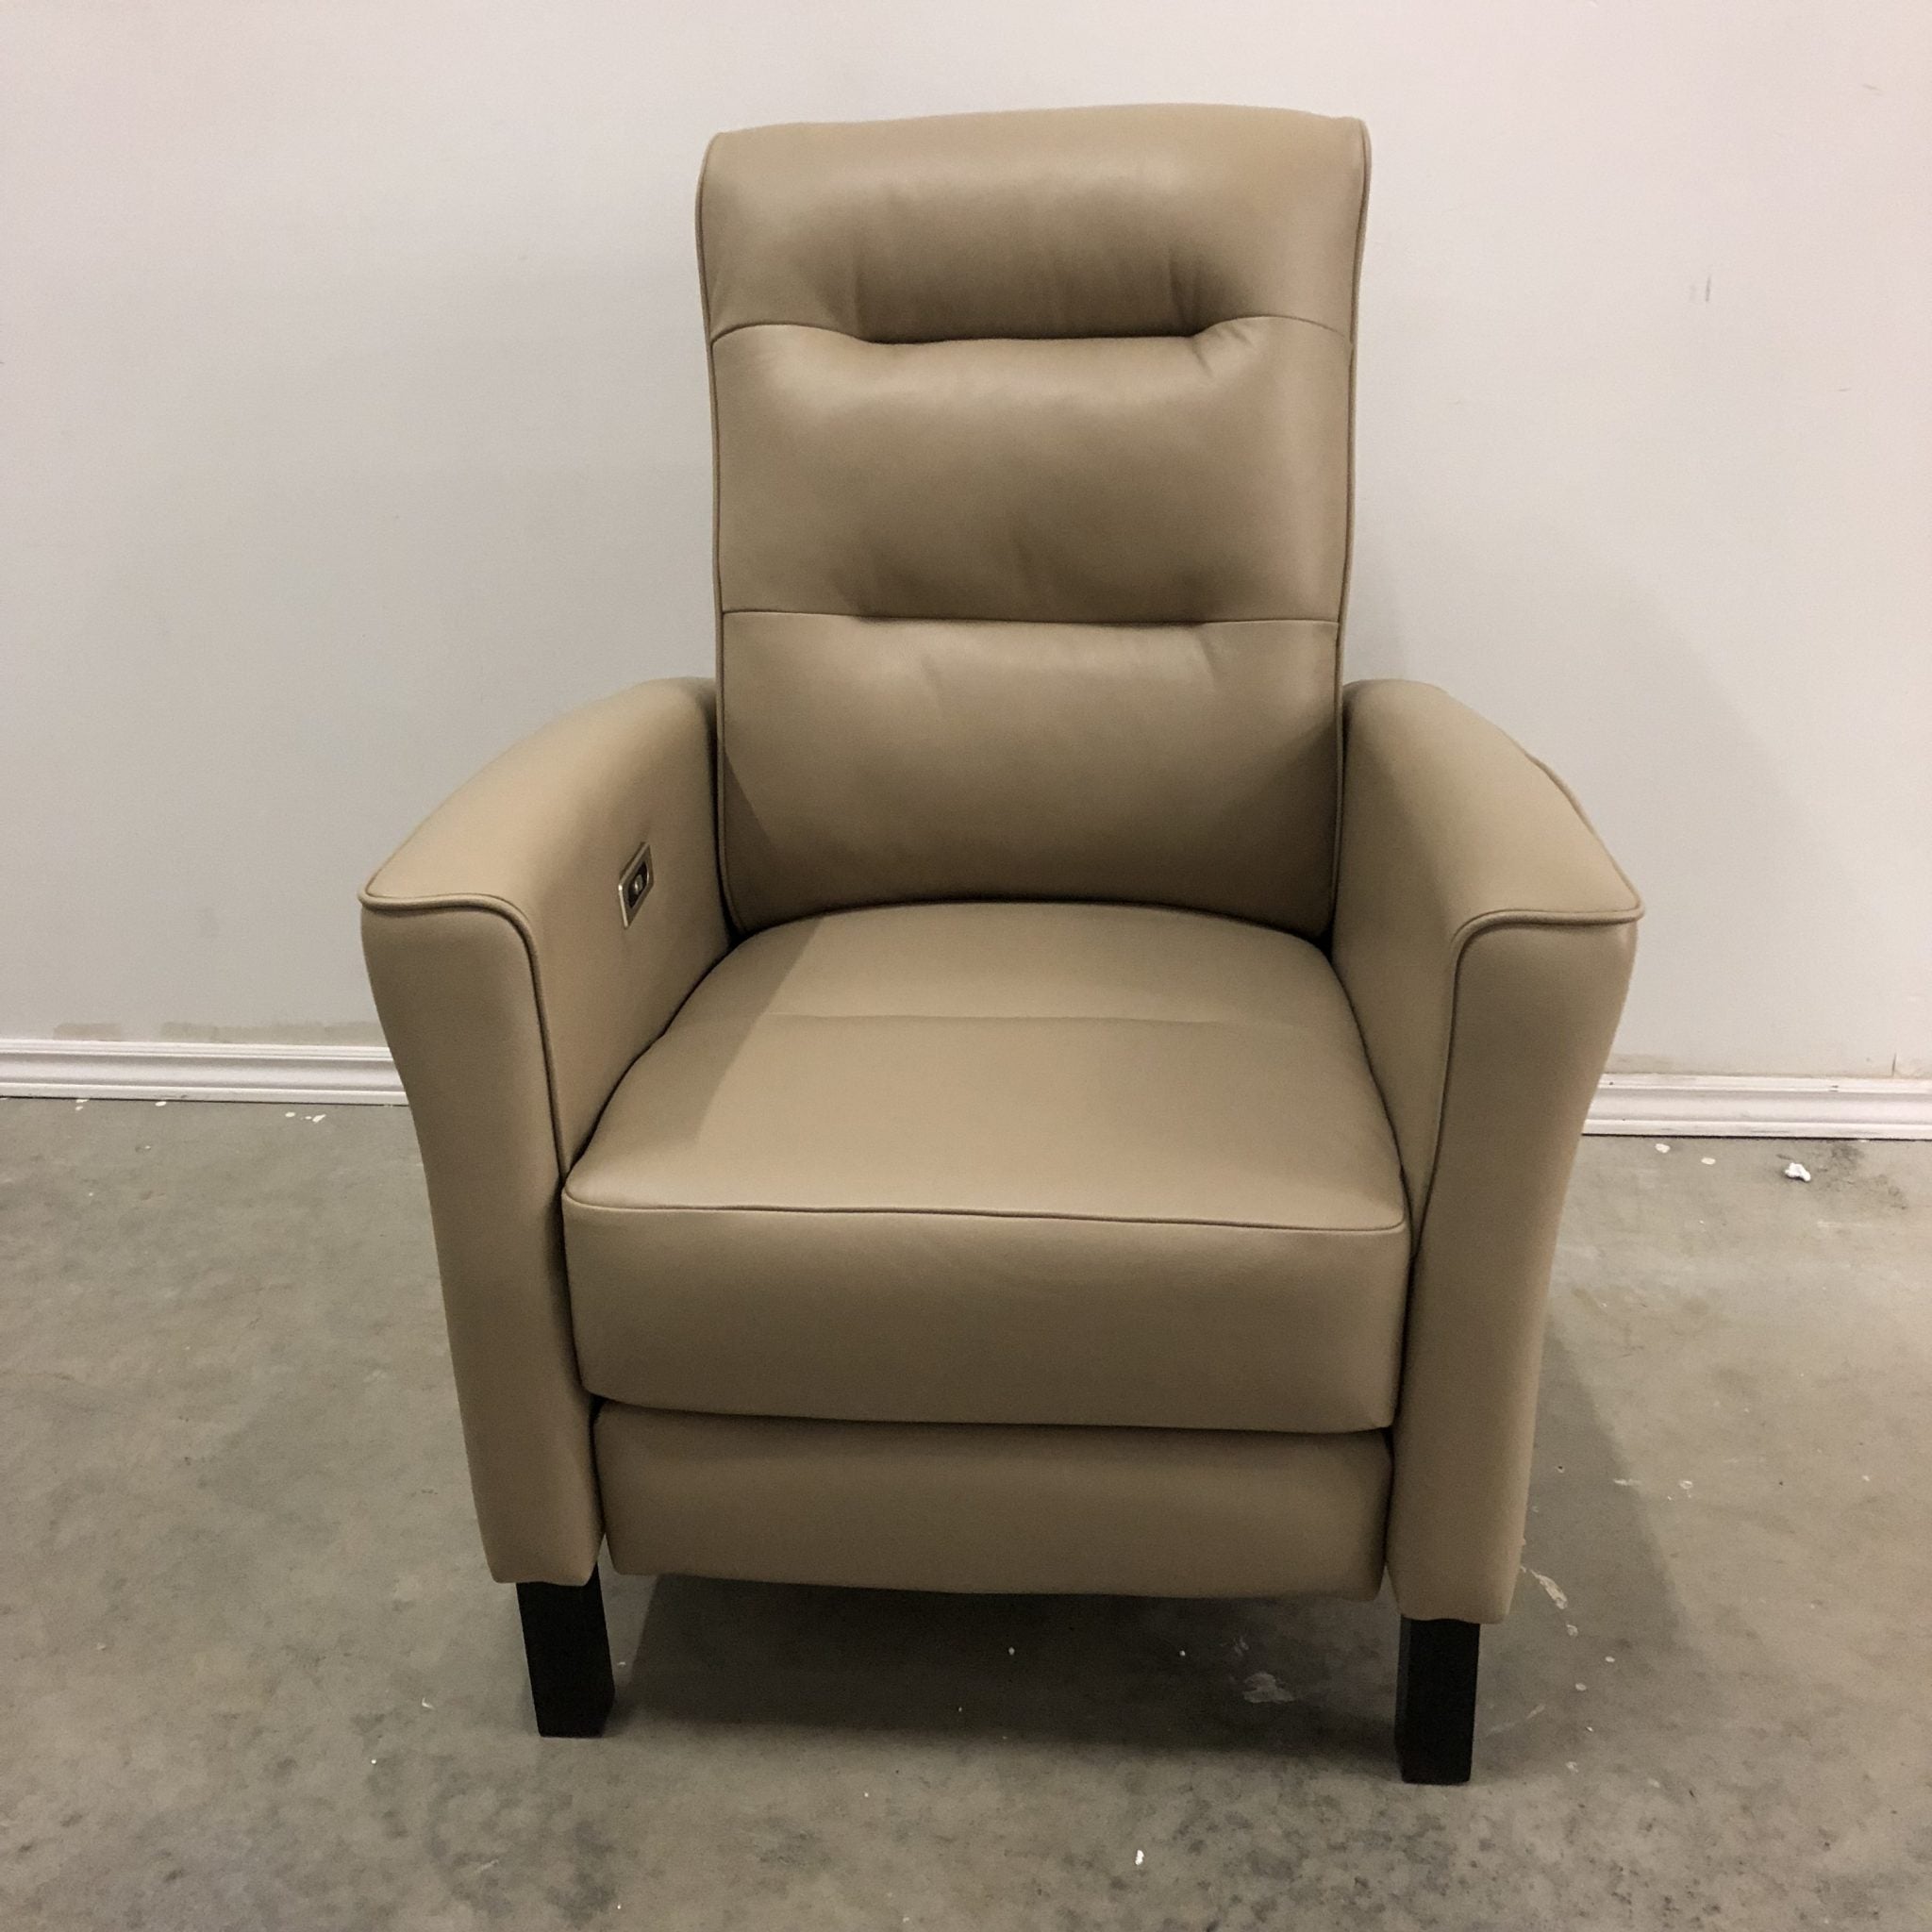 RELAXON POWER LEATHER RECLINER